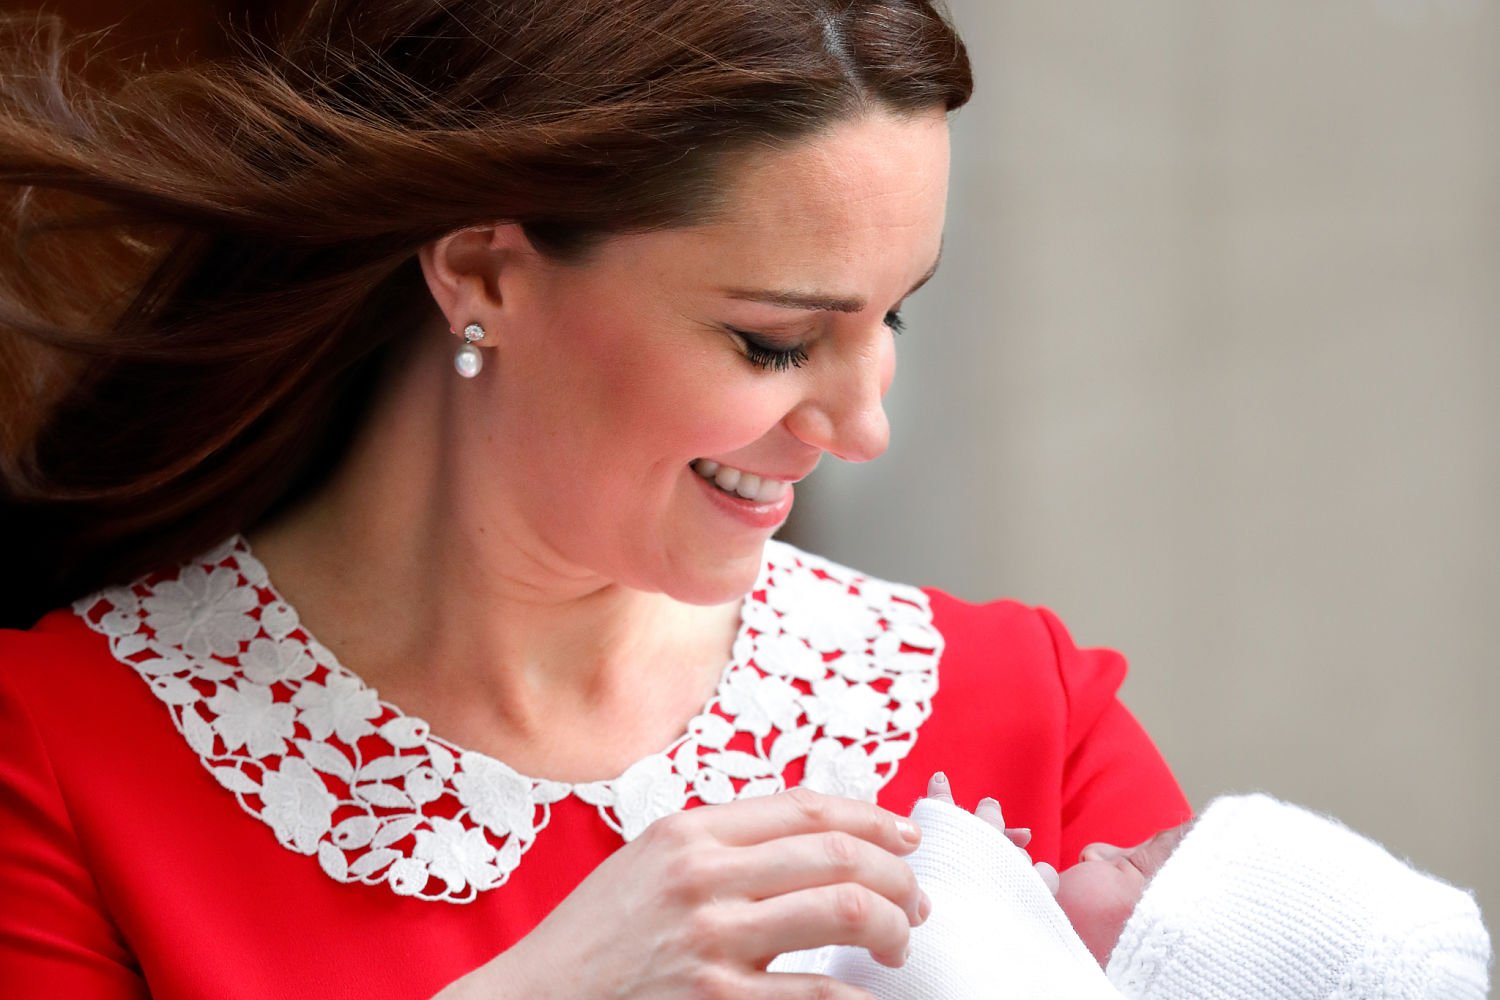 Kate Middleton and her third child, Prince Louis